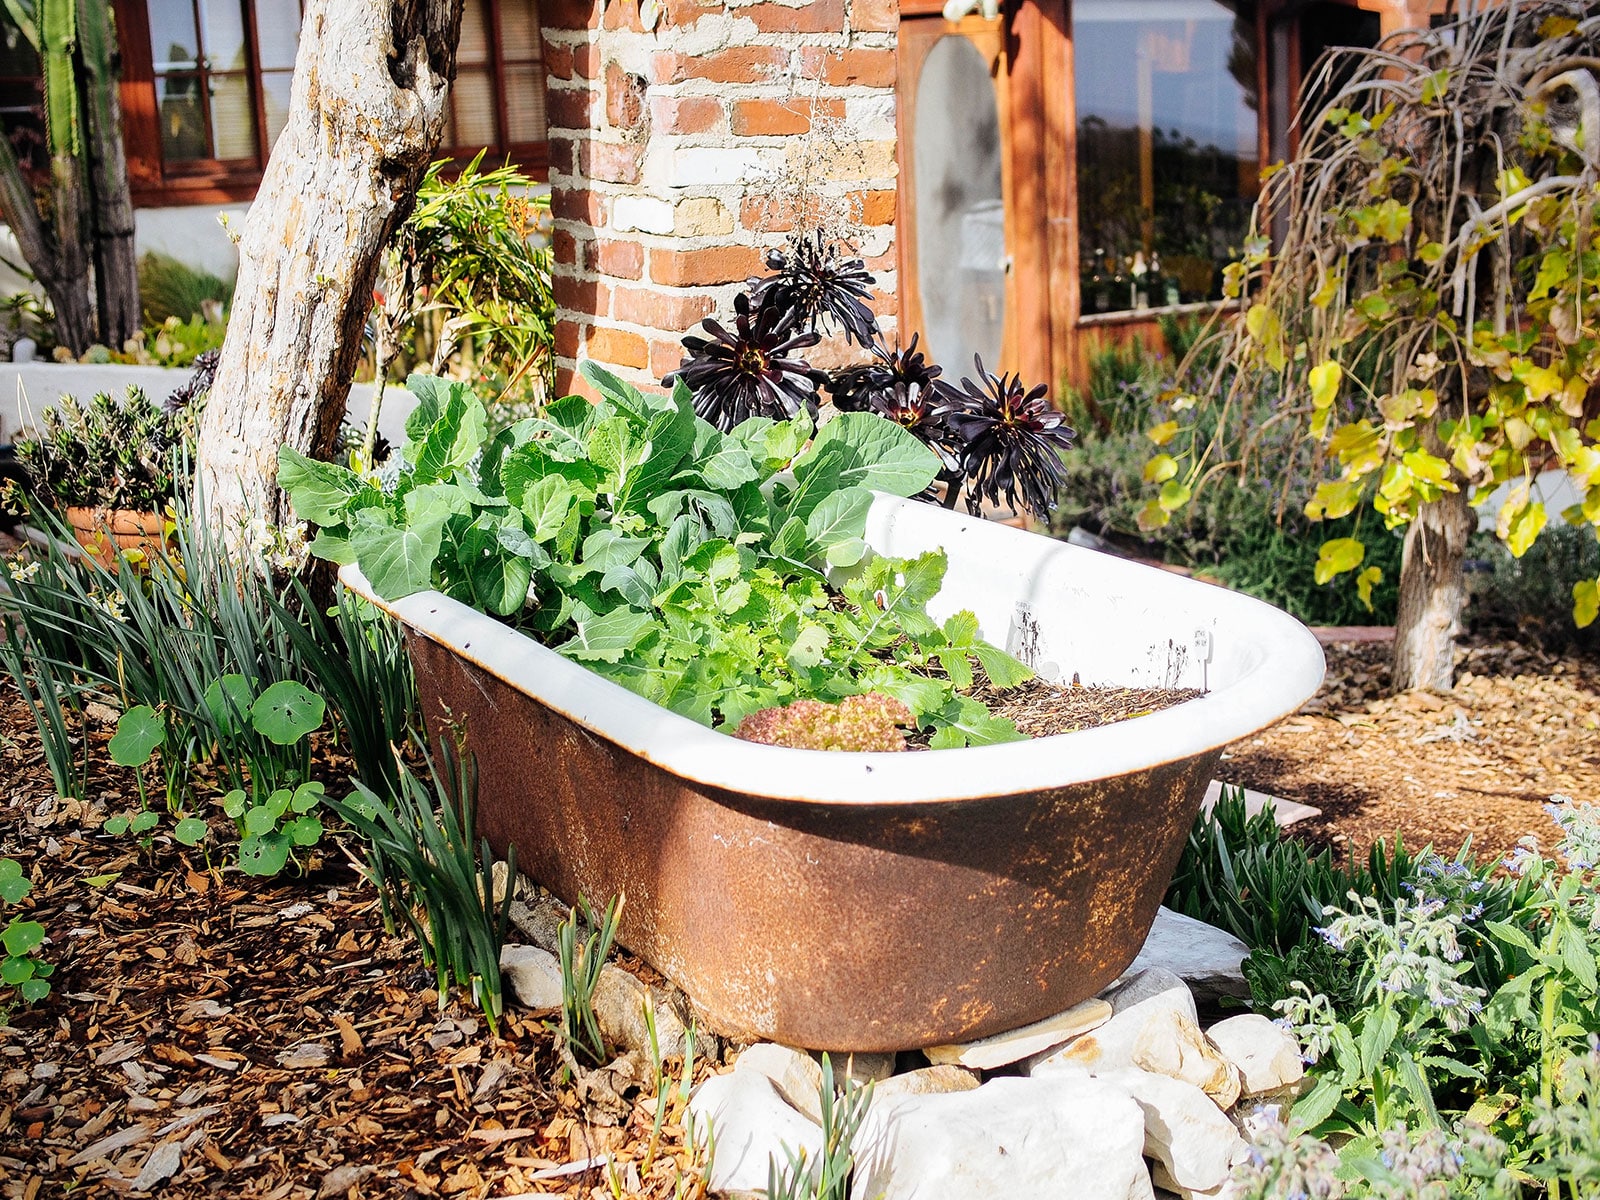 An old clawfoot tub turned into a planter with leafy vegetables in it